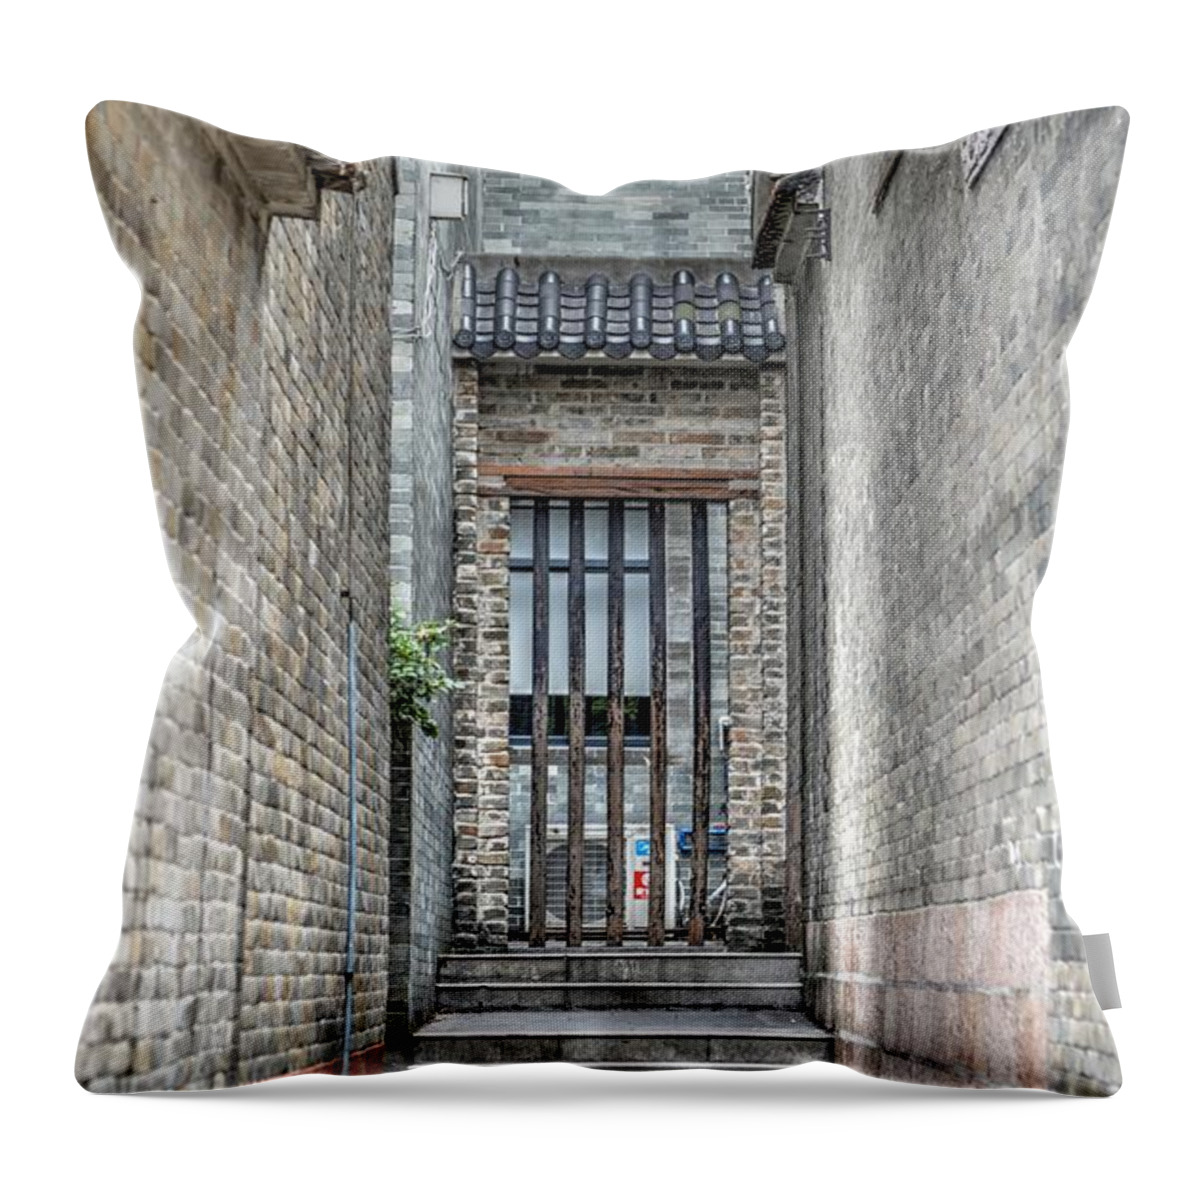 China Throw Pillow featuring the photograph China Alley by Bill Hamilton